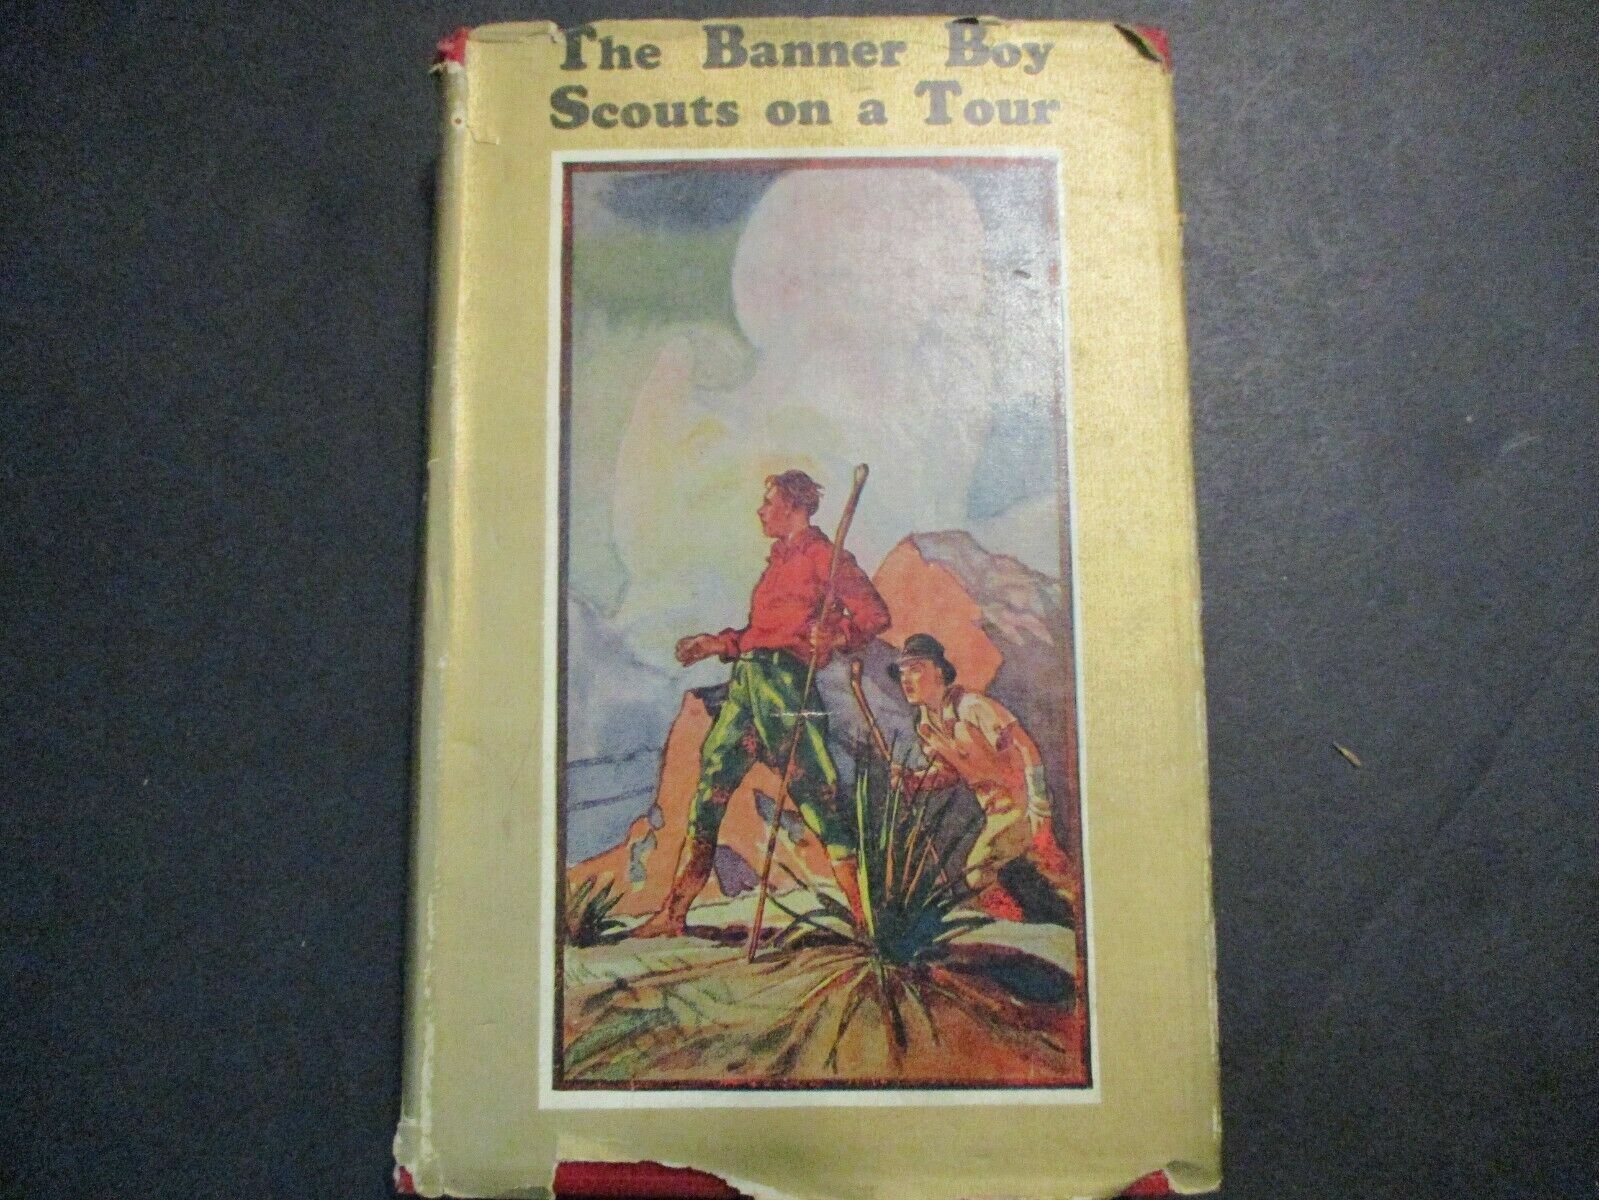 The Banner Boy Scouts on a Tour boy scout story book